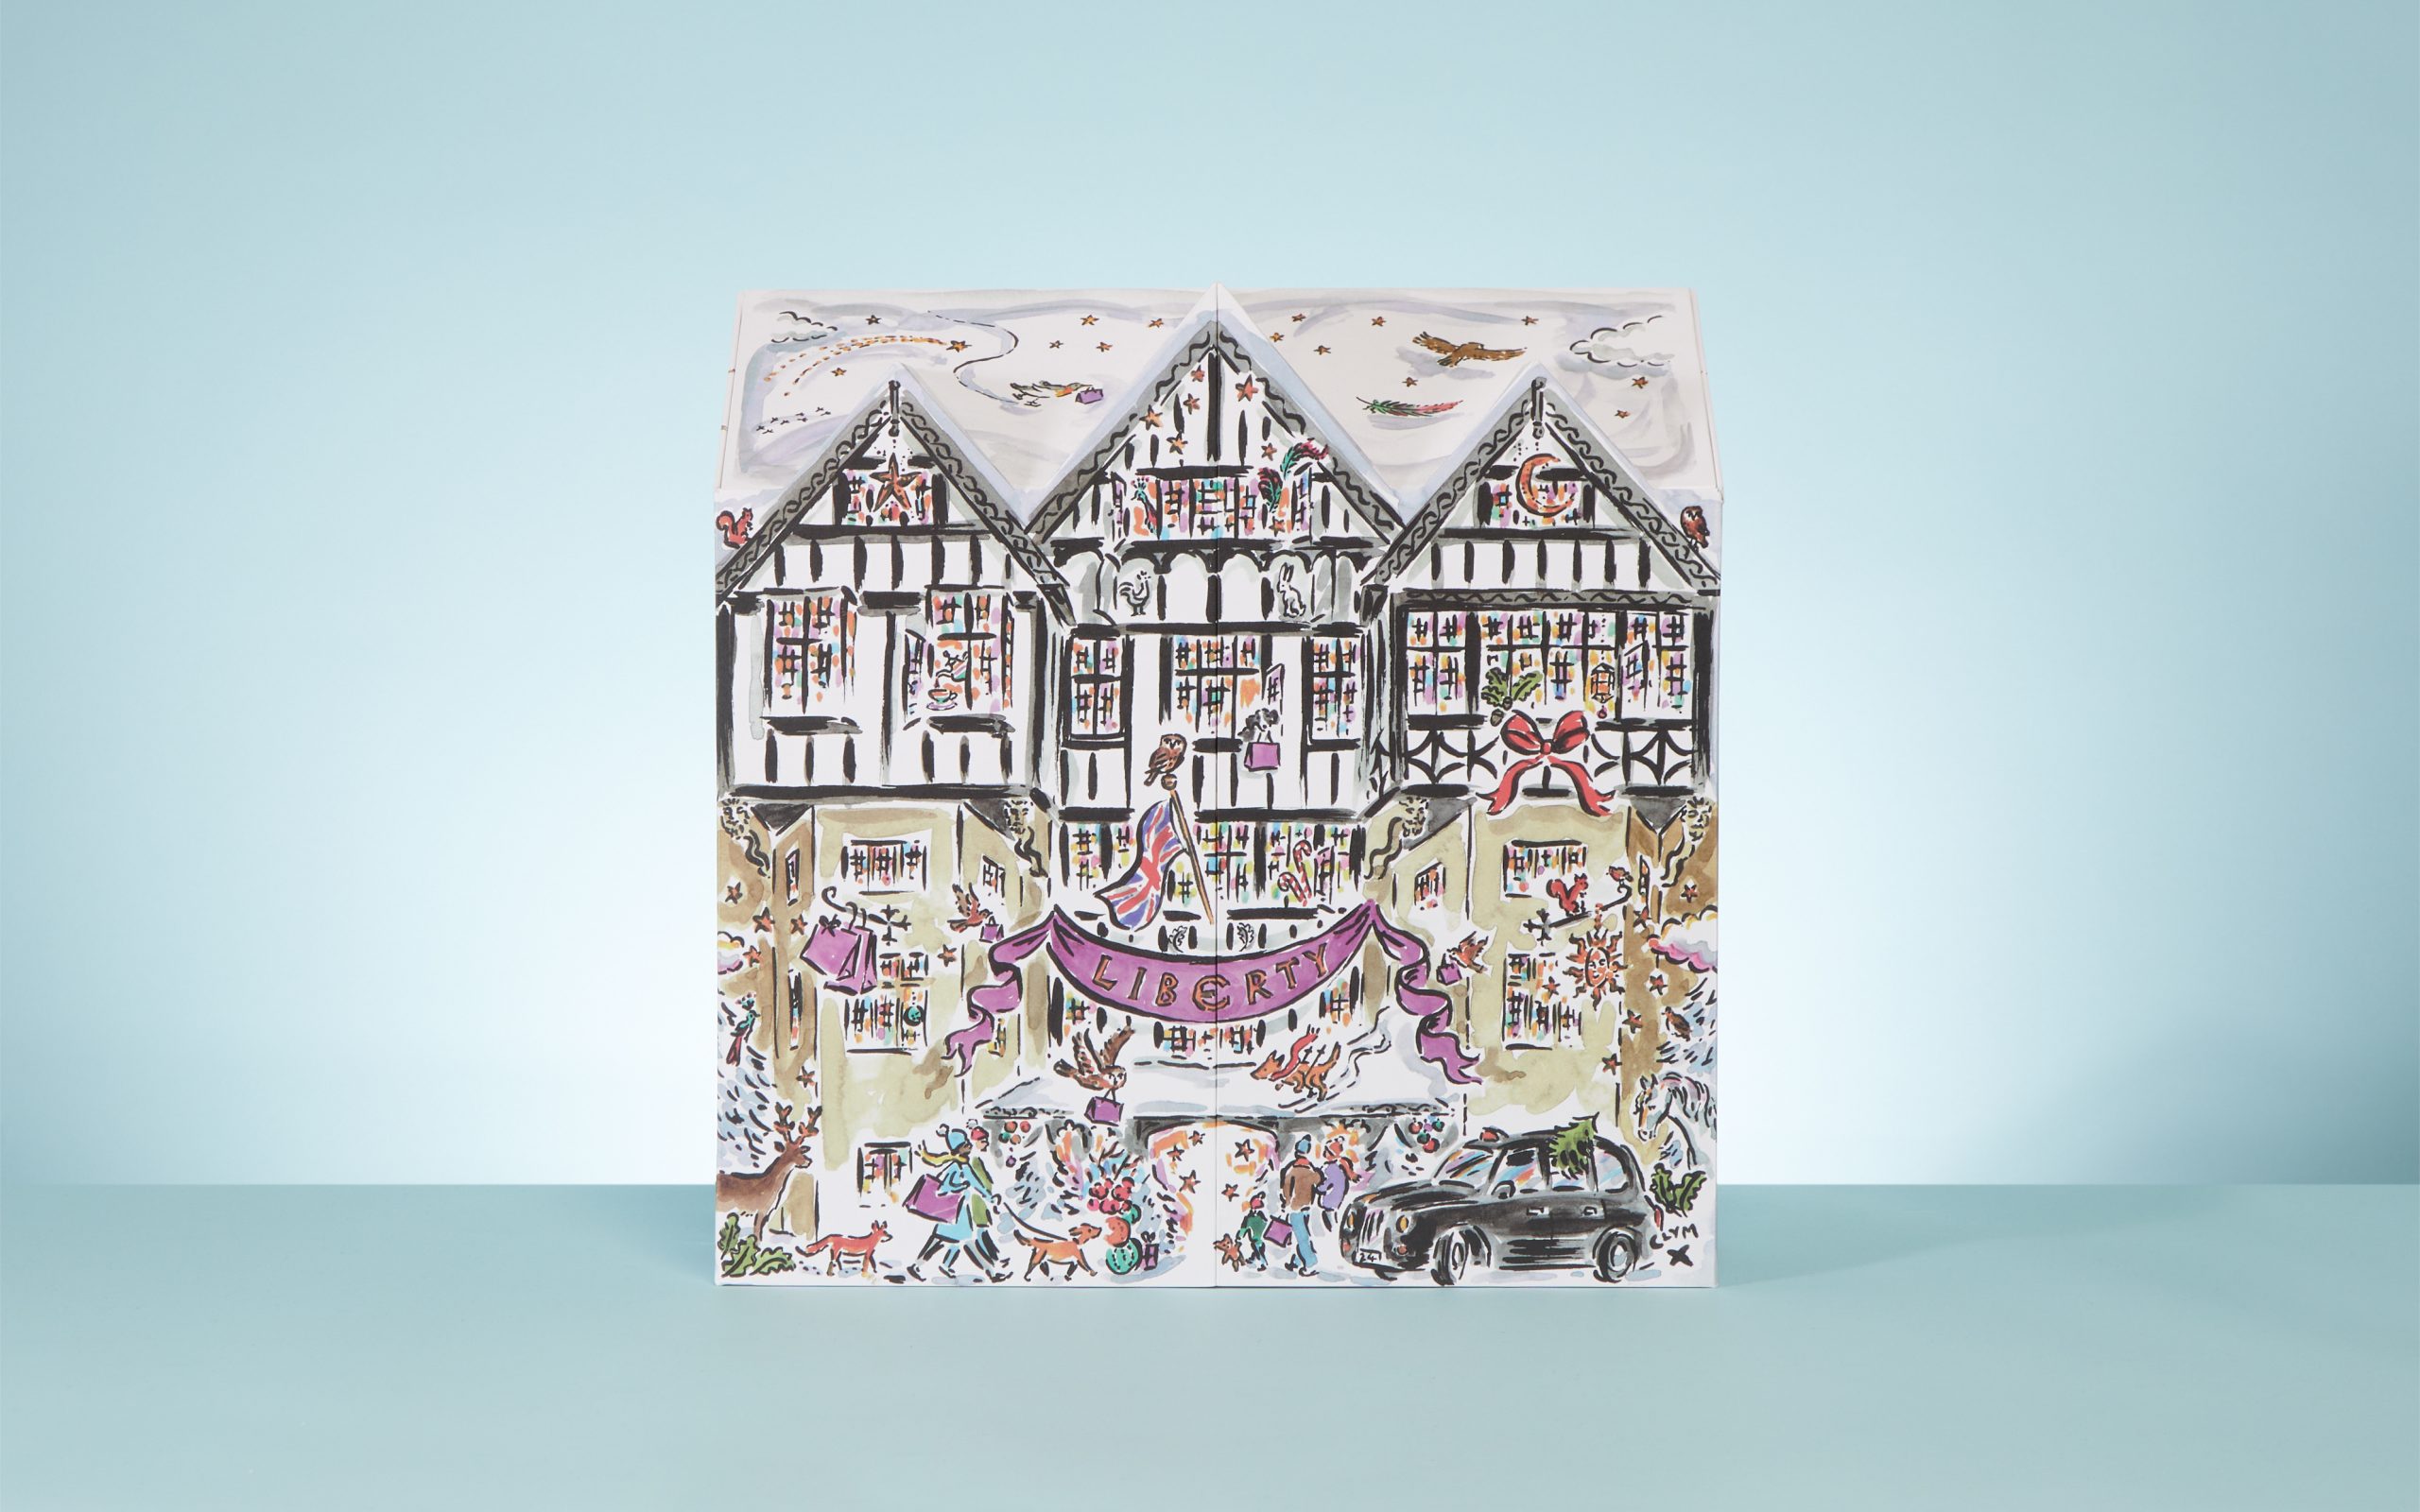 Want to get your hands on the Liberty Advent Calendar?